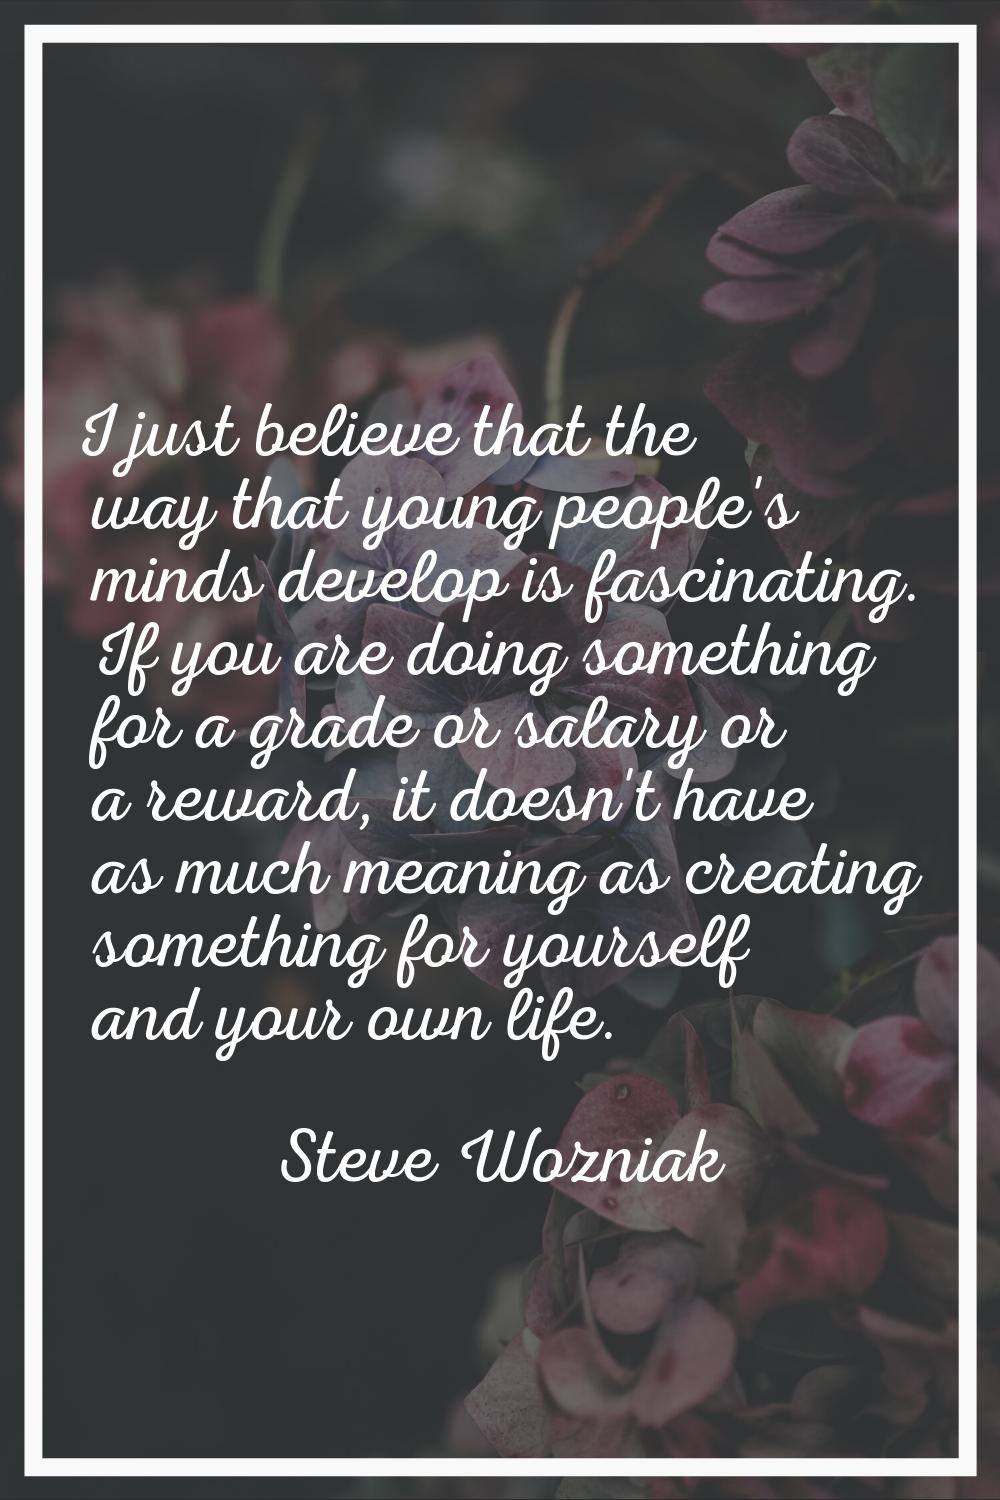 I just believe that the way that young people's minds develop is fascinating. If you are doing some